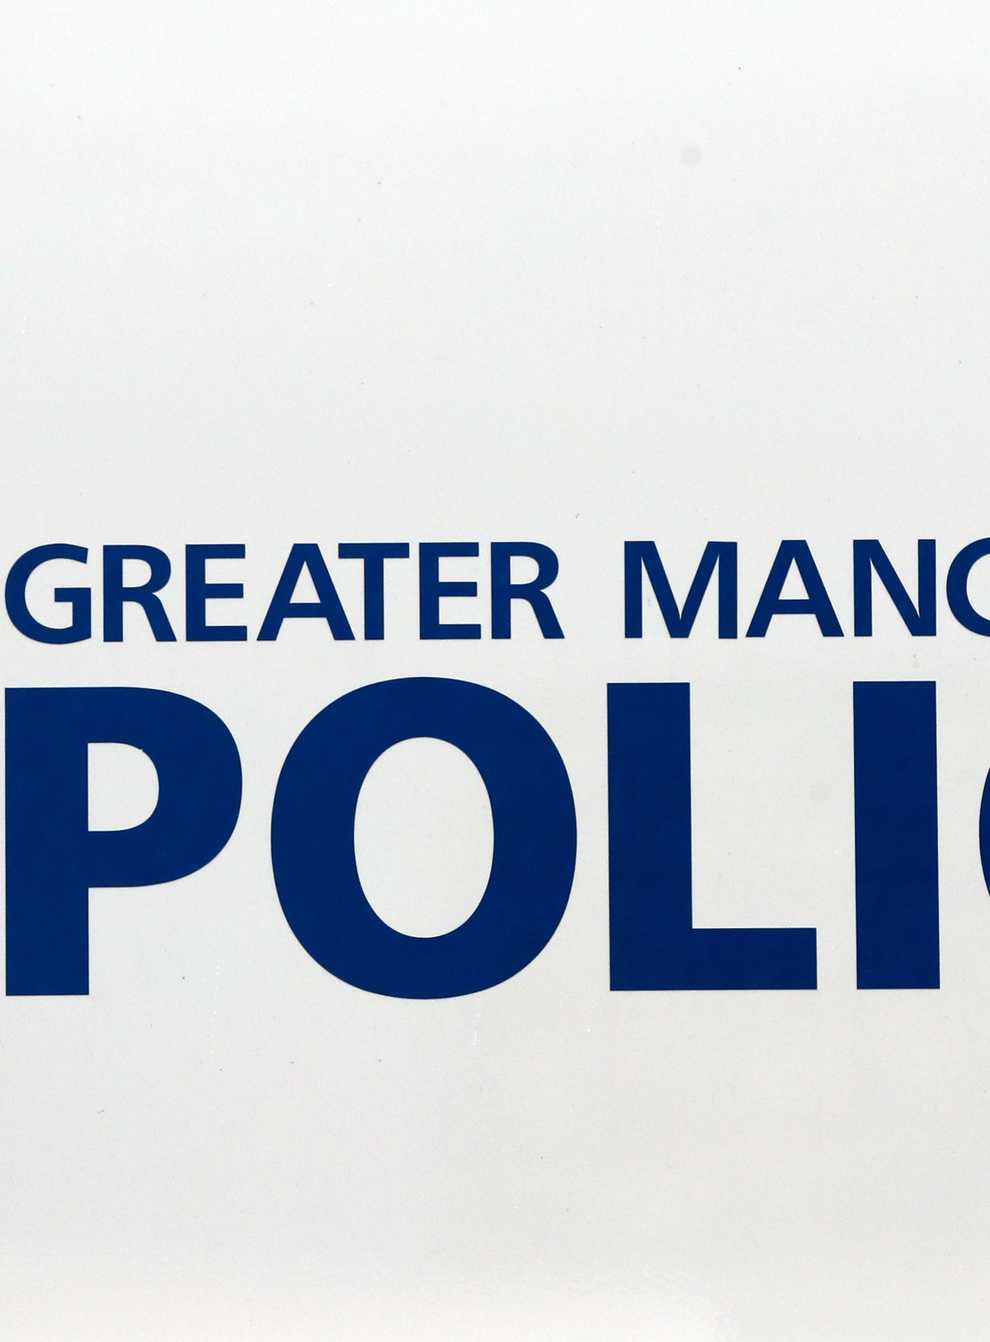 Greater Manchester Police urged anyone who has had direct contact with a body believed to have potentially hazardous substances on it to contact officers or seek medical advice immediately (Nick Potts/PA)